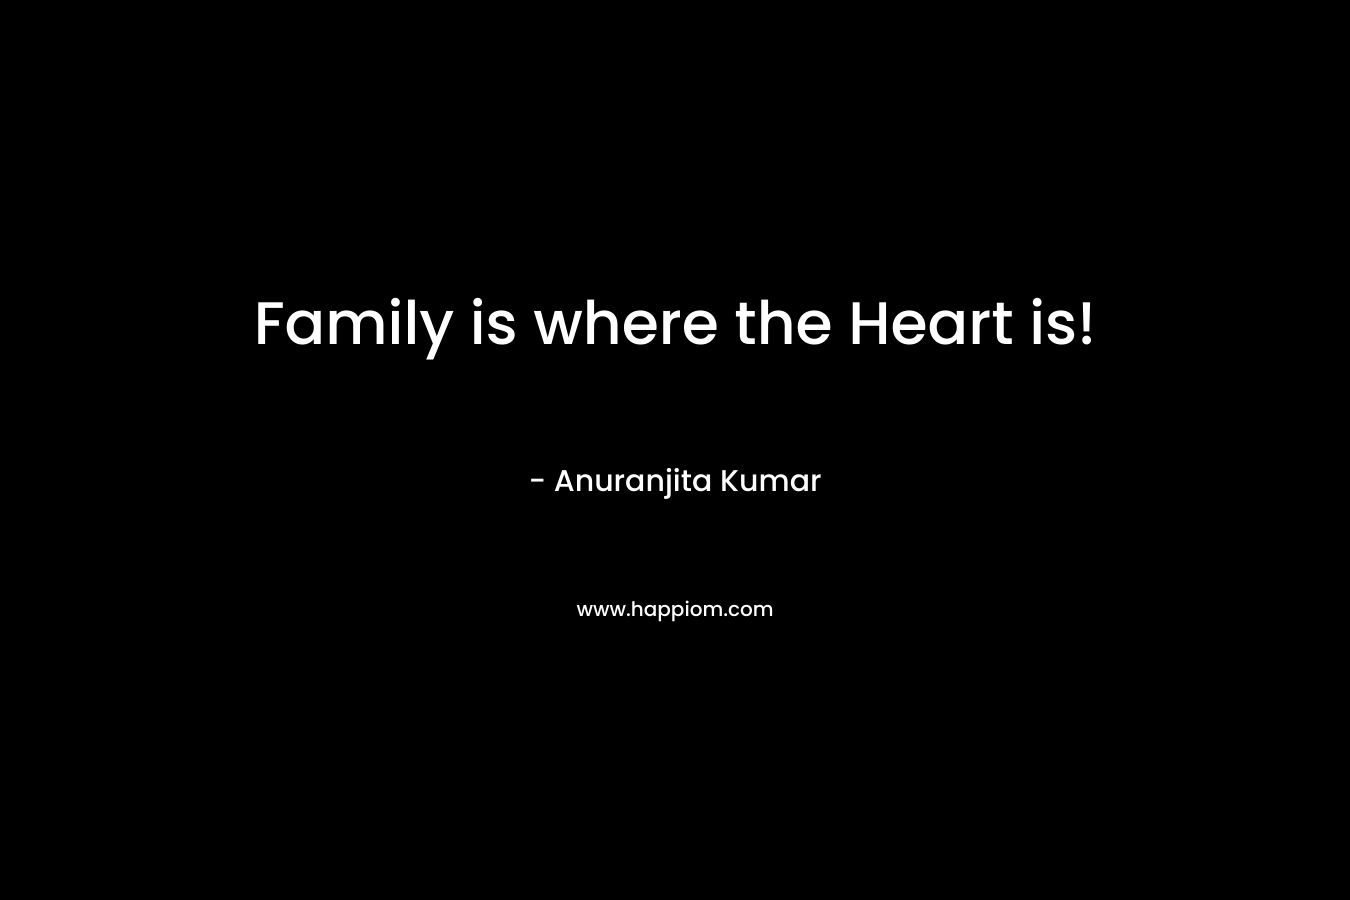 Family is where the Heart is!